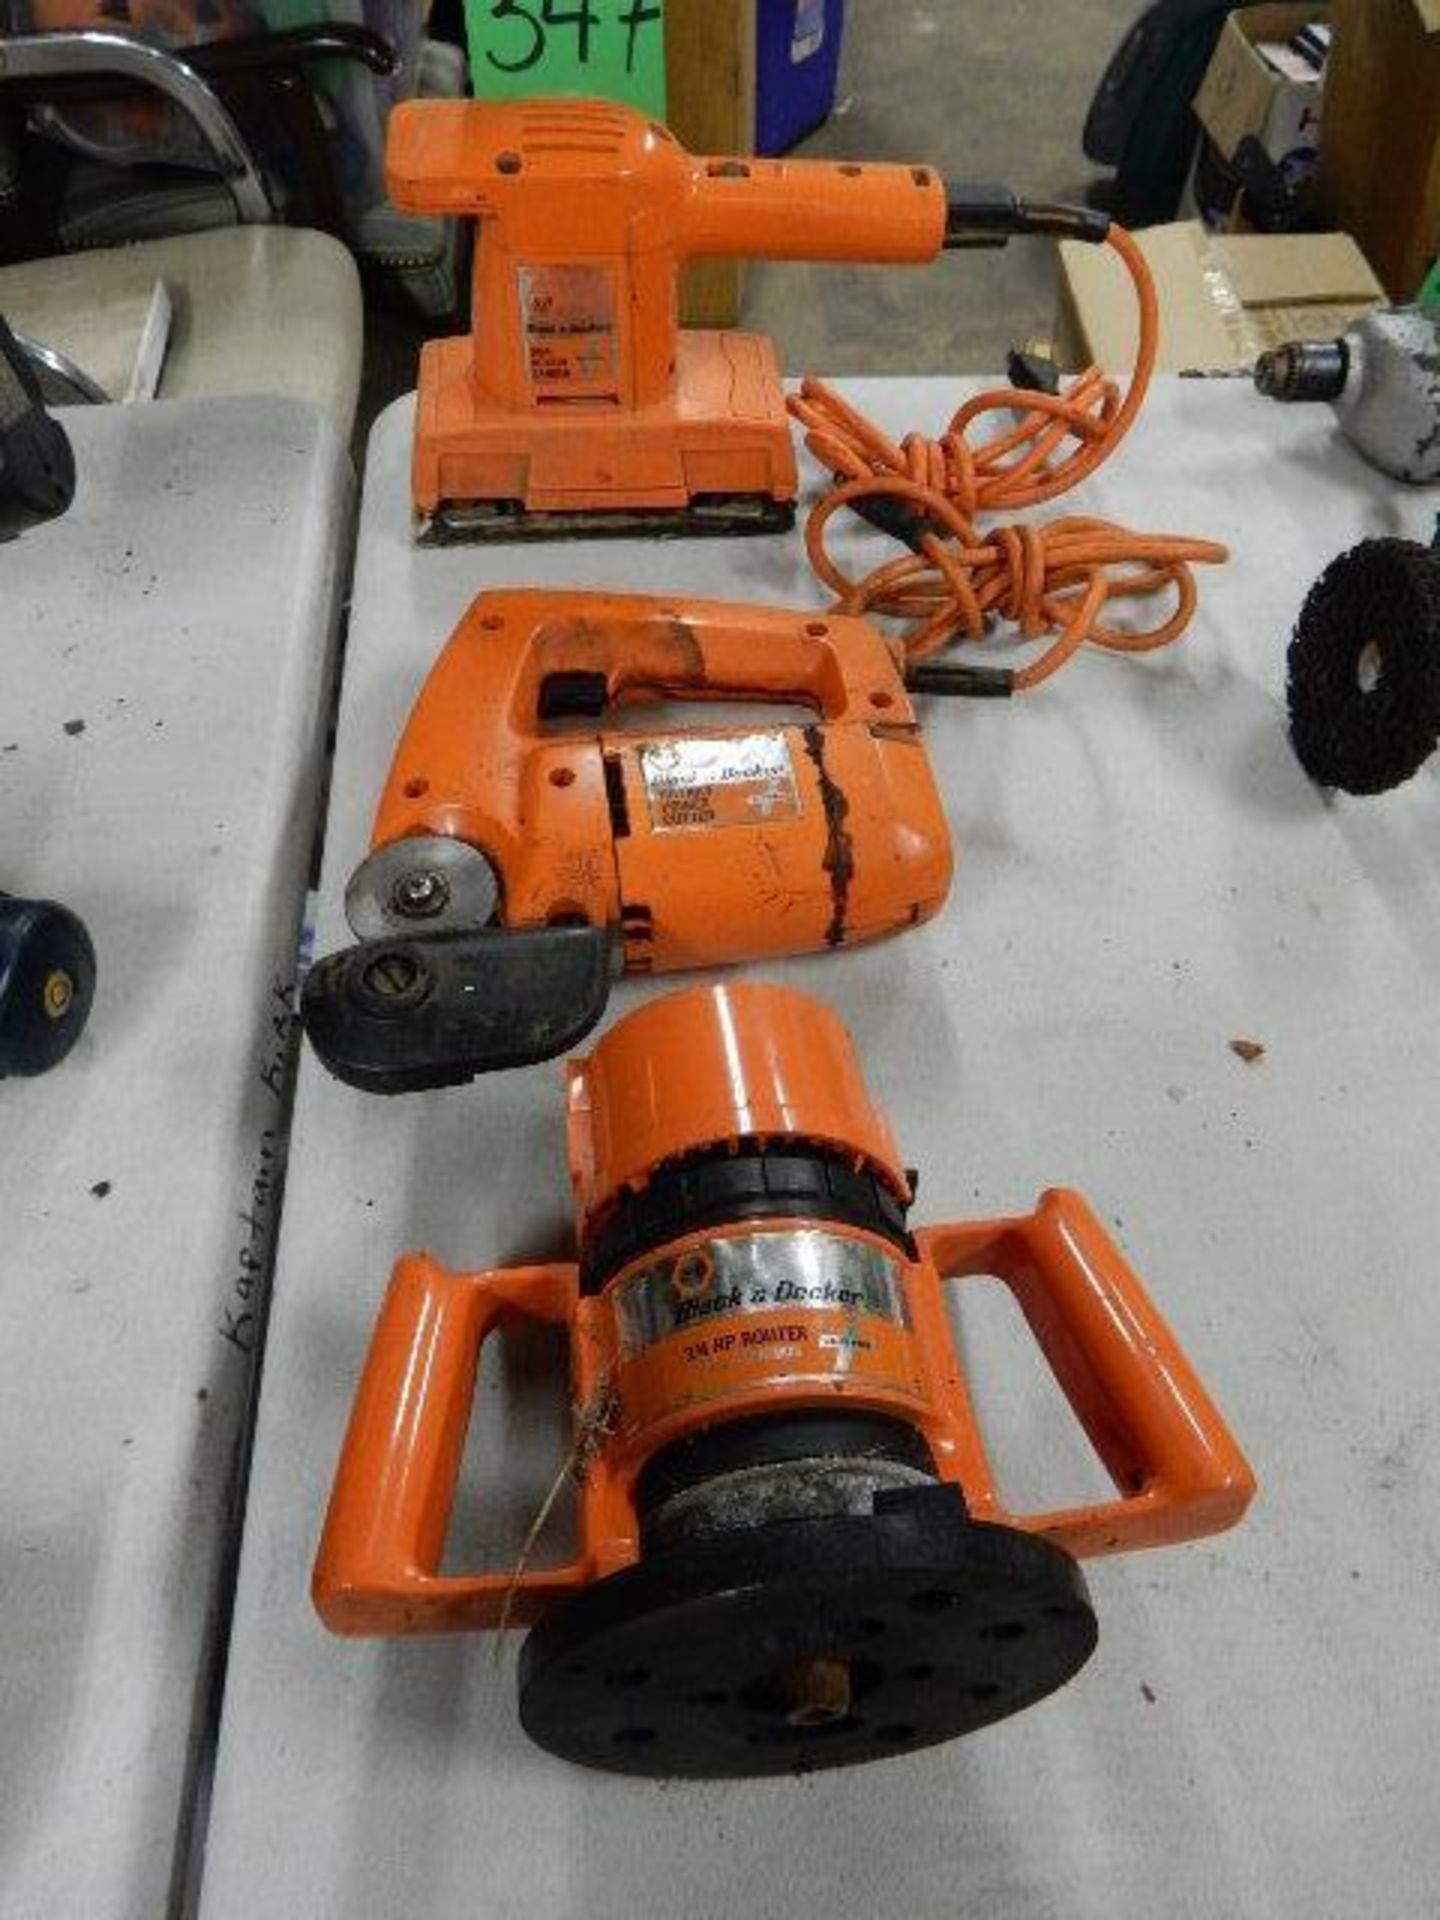 Black&Decker Electric Coved Tool set to include: 1ea Dual Action Sander , Rotary Power Cutter, 3/4 H